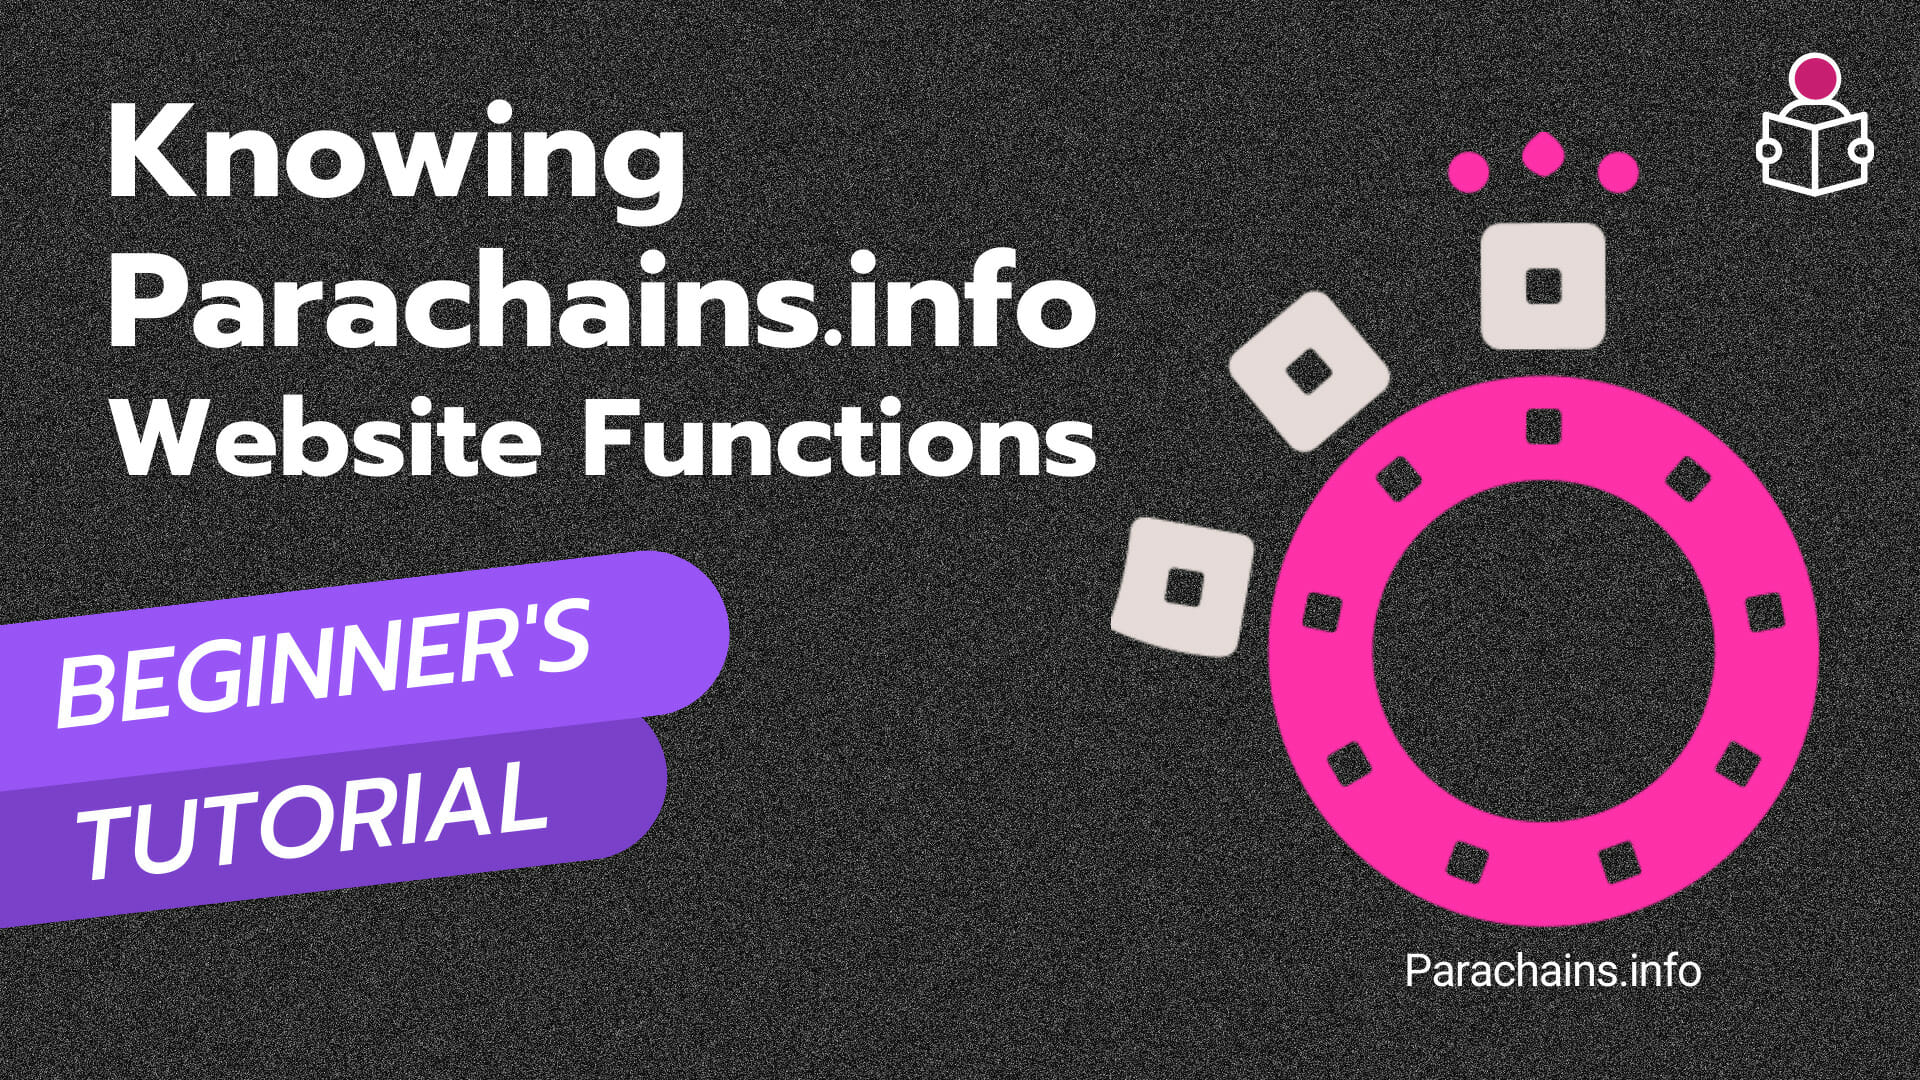 Uncover the diverse features of Parachains.info, the go-to website for all your Polkadot ecosystem needs.